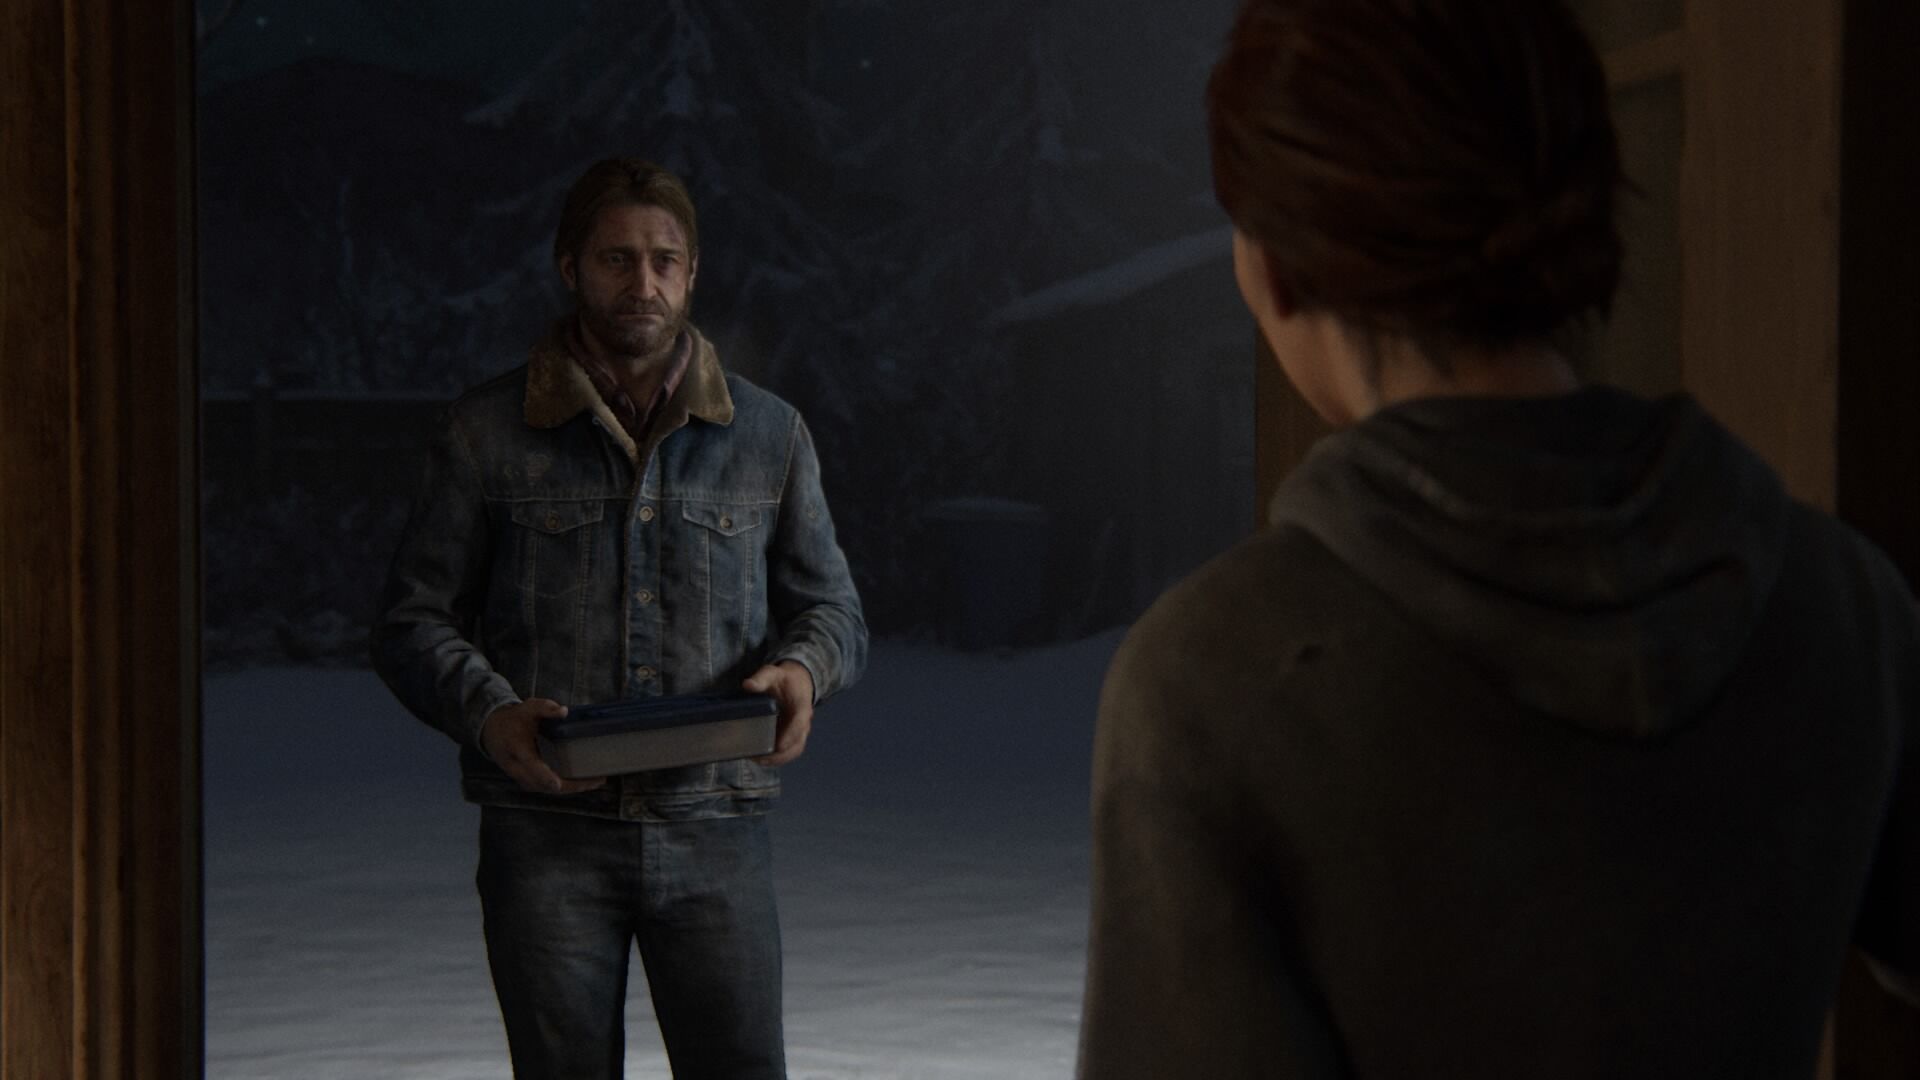 Tommy Miller, The Last of Us Wiki